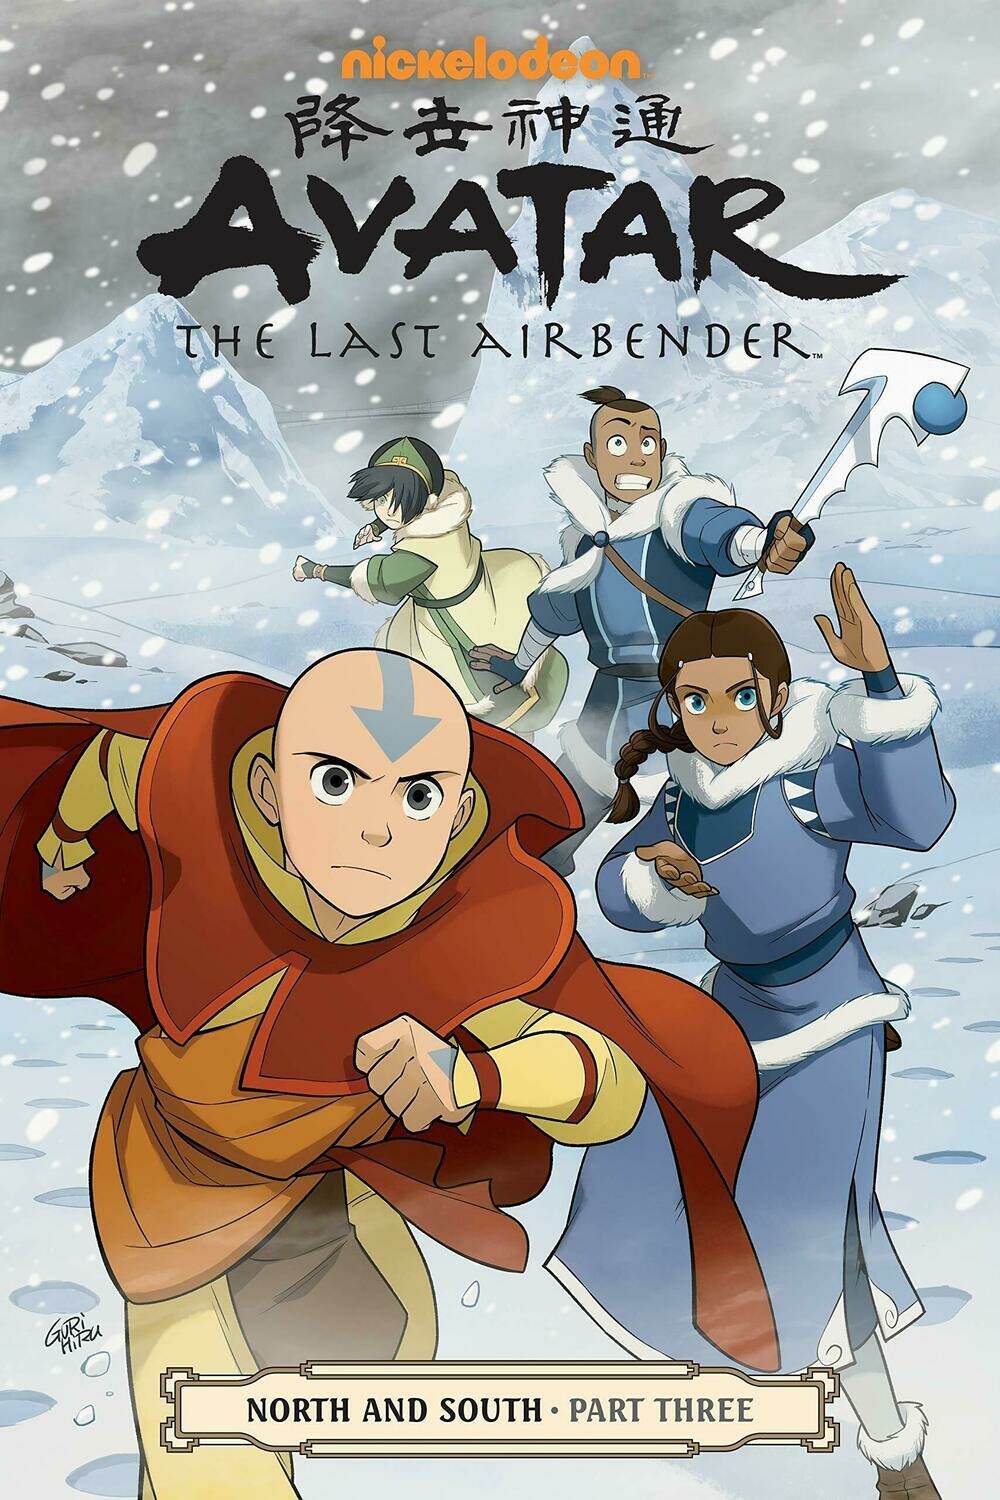 Avatar: The Last Airbender - North And South Part One